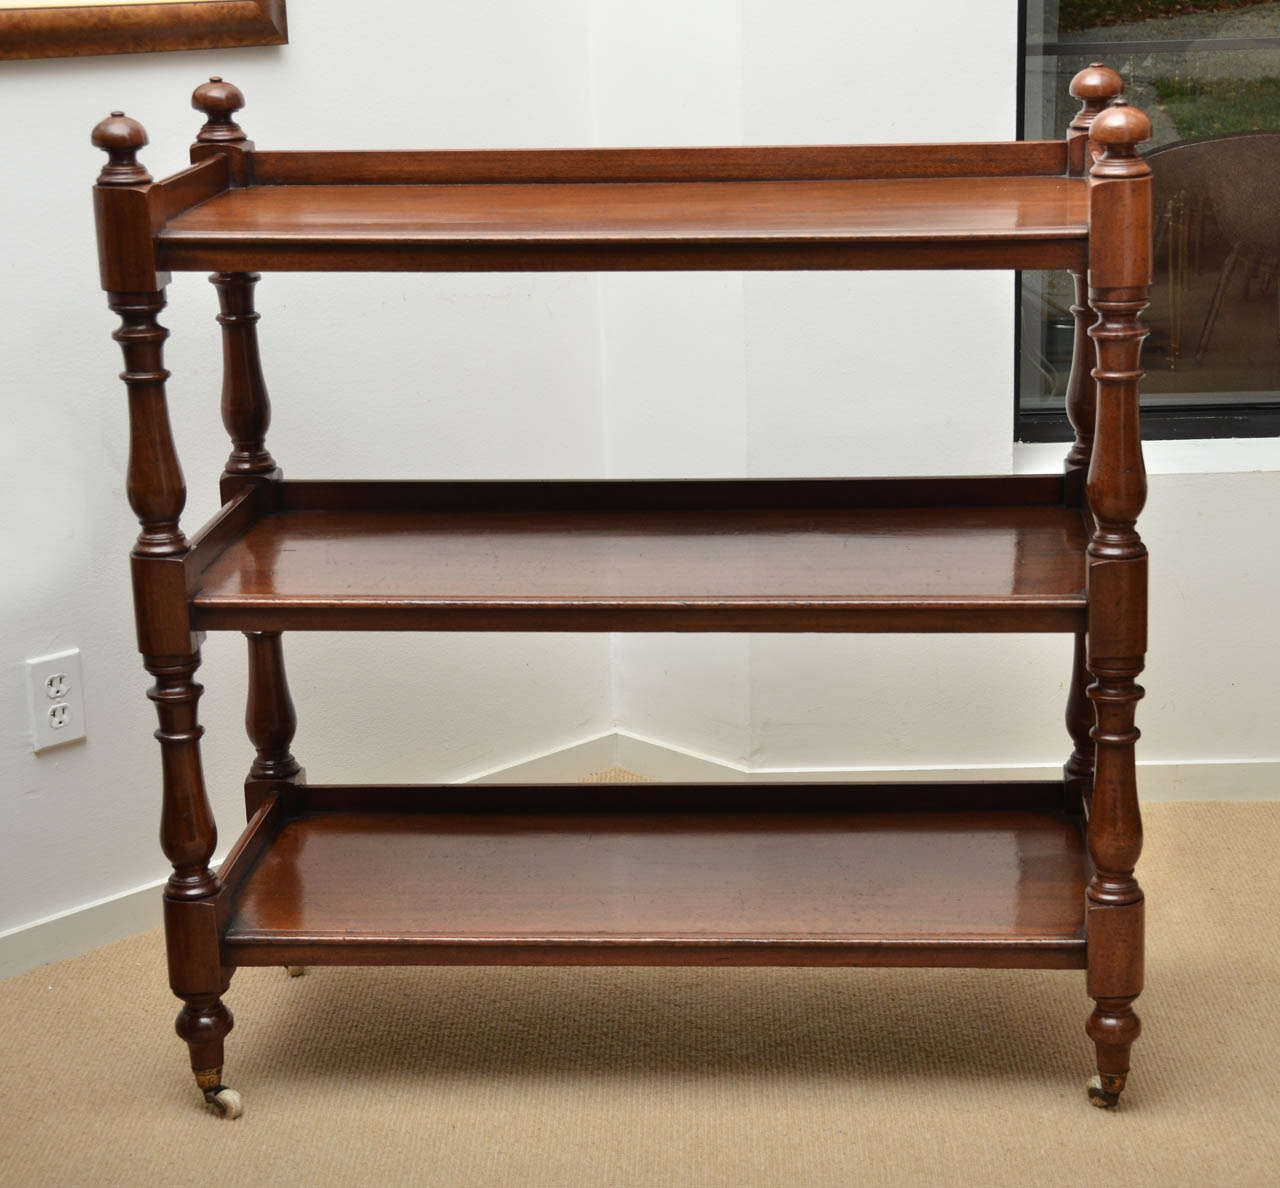 Early 19th century, three tier mahogany server with molded edge, turned supports, turned finials, original china casters.